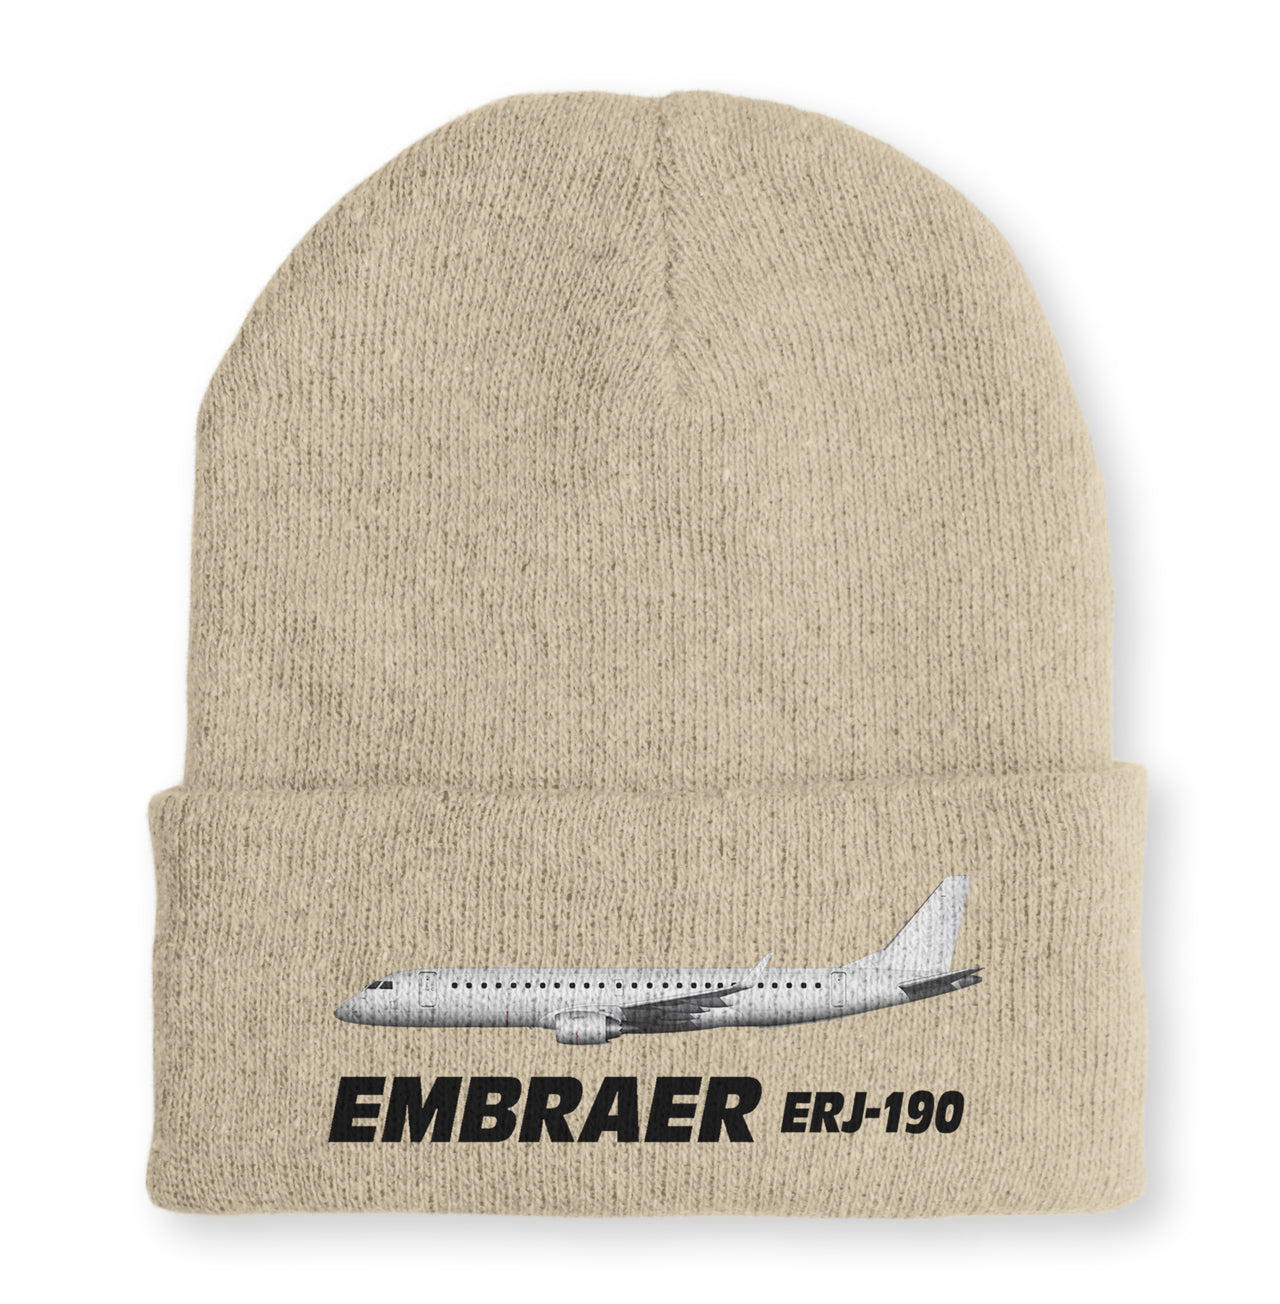 The Embraer ERJ-190 Embroidered Beanies